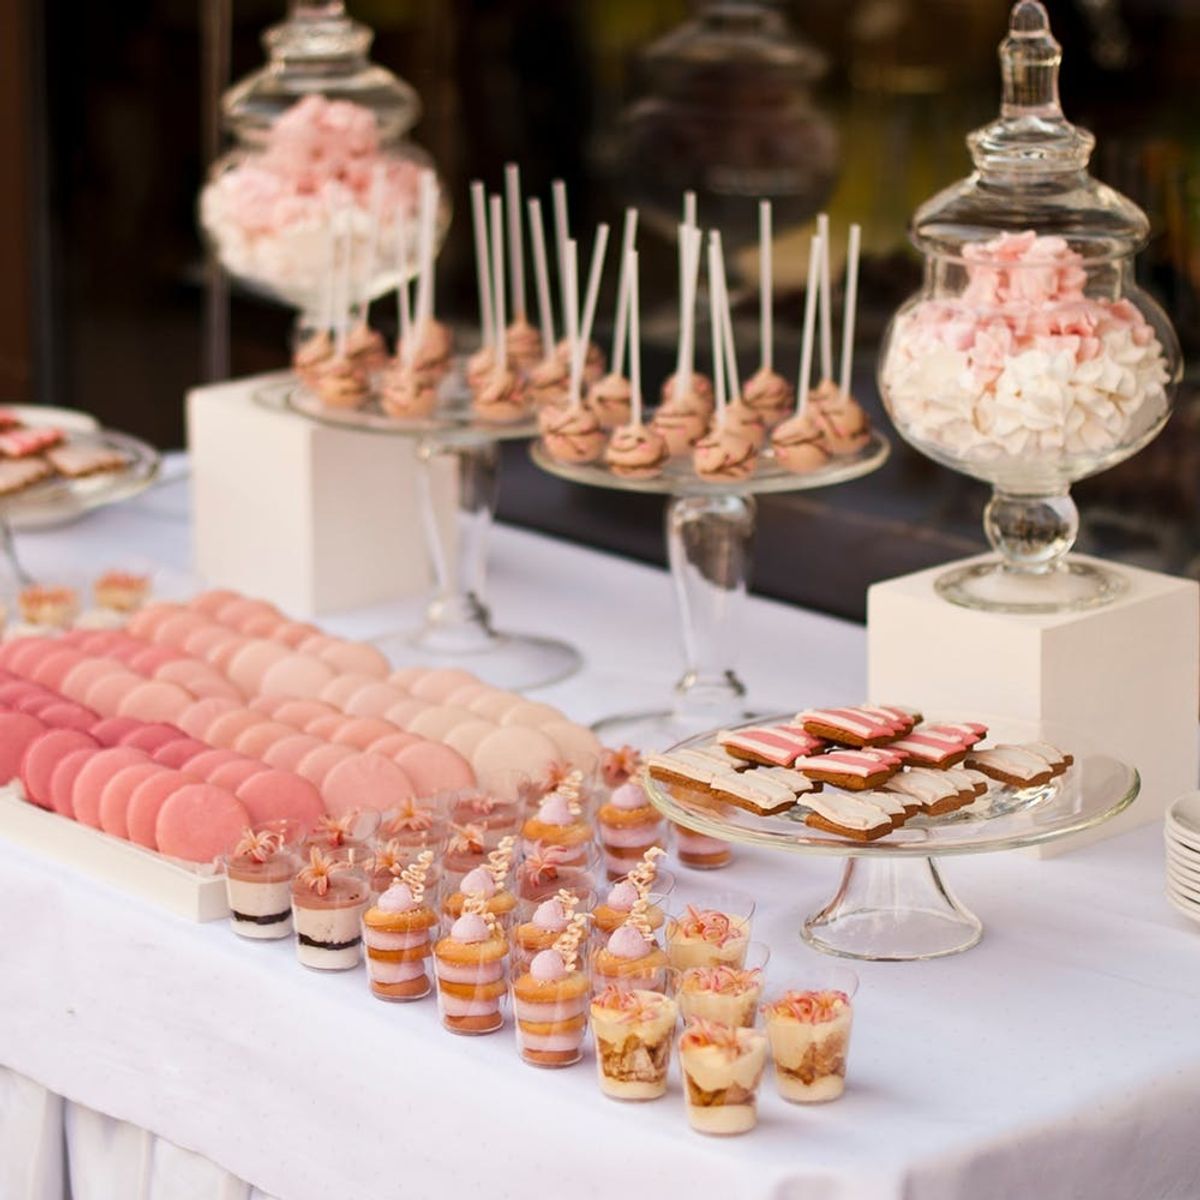 11 Creative Wedding Buffet Ideas to Personalize Your Reception